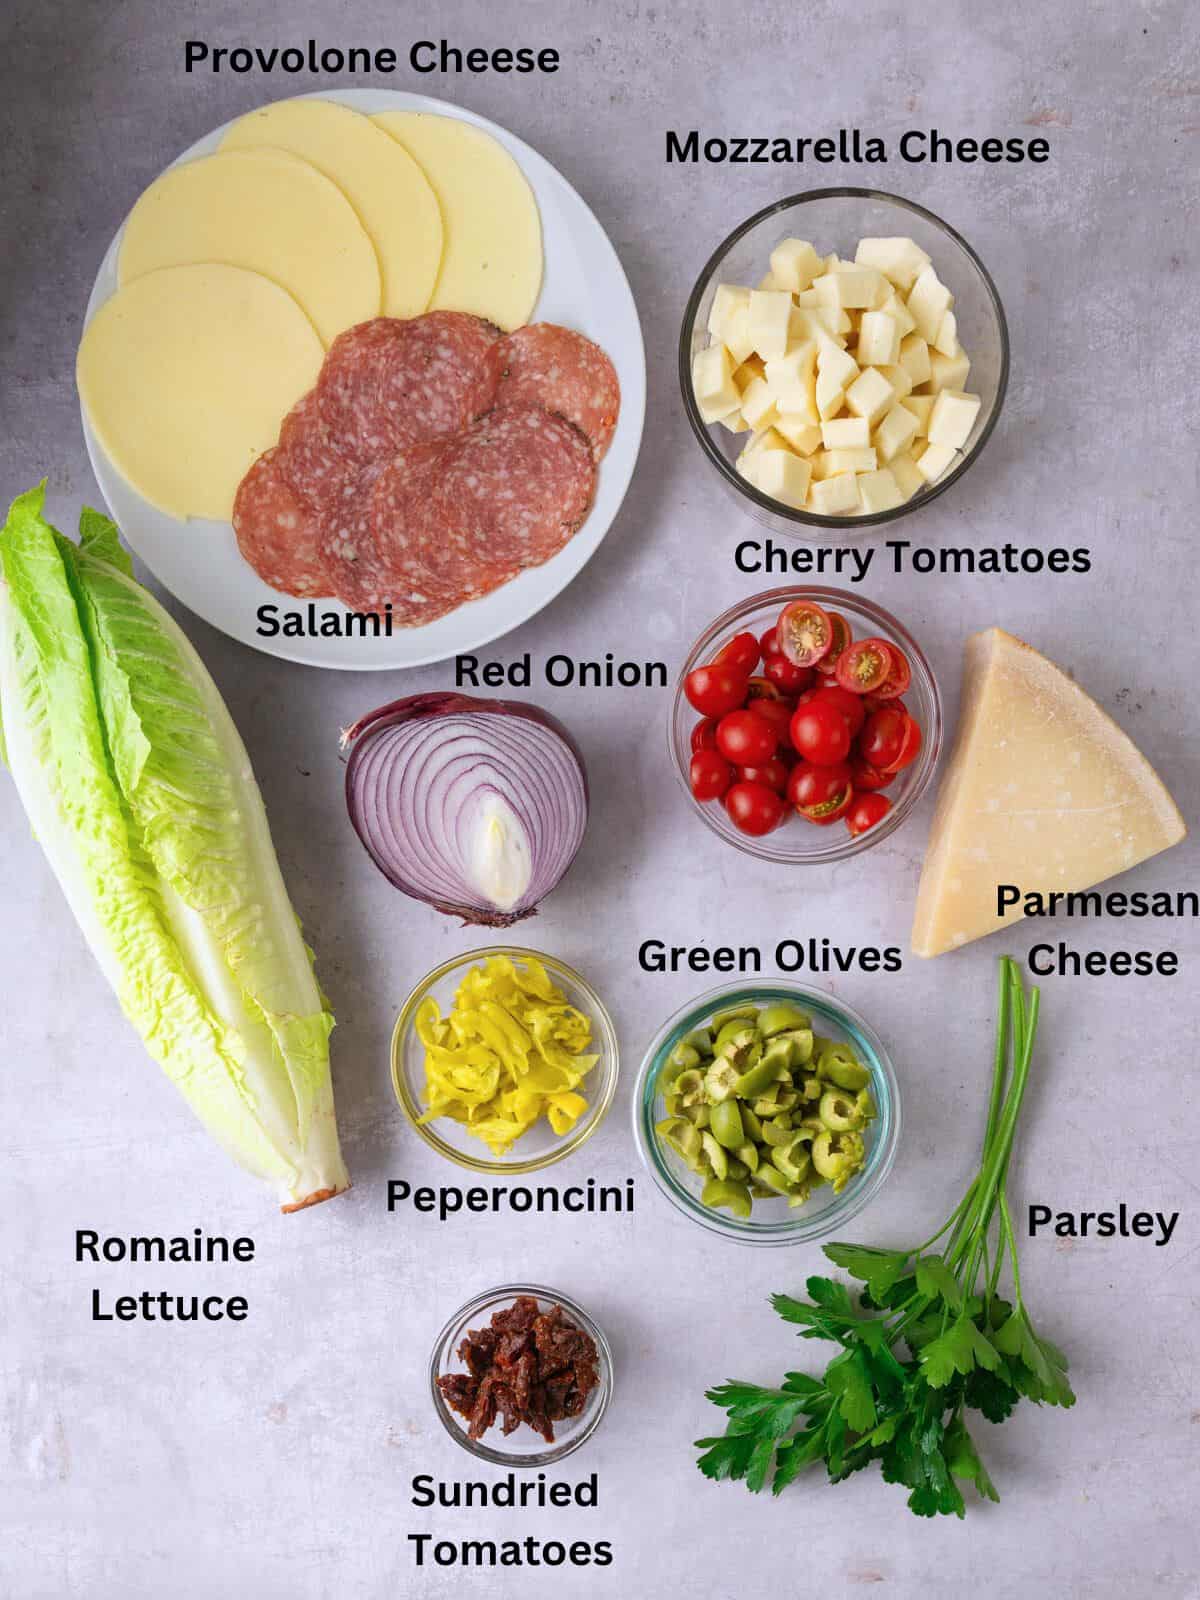 Ingredients for chopped antipasto salad including salami, provolone cheese, olives and sundried tomatoes.